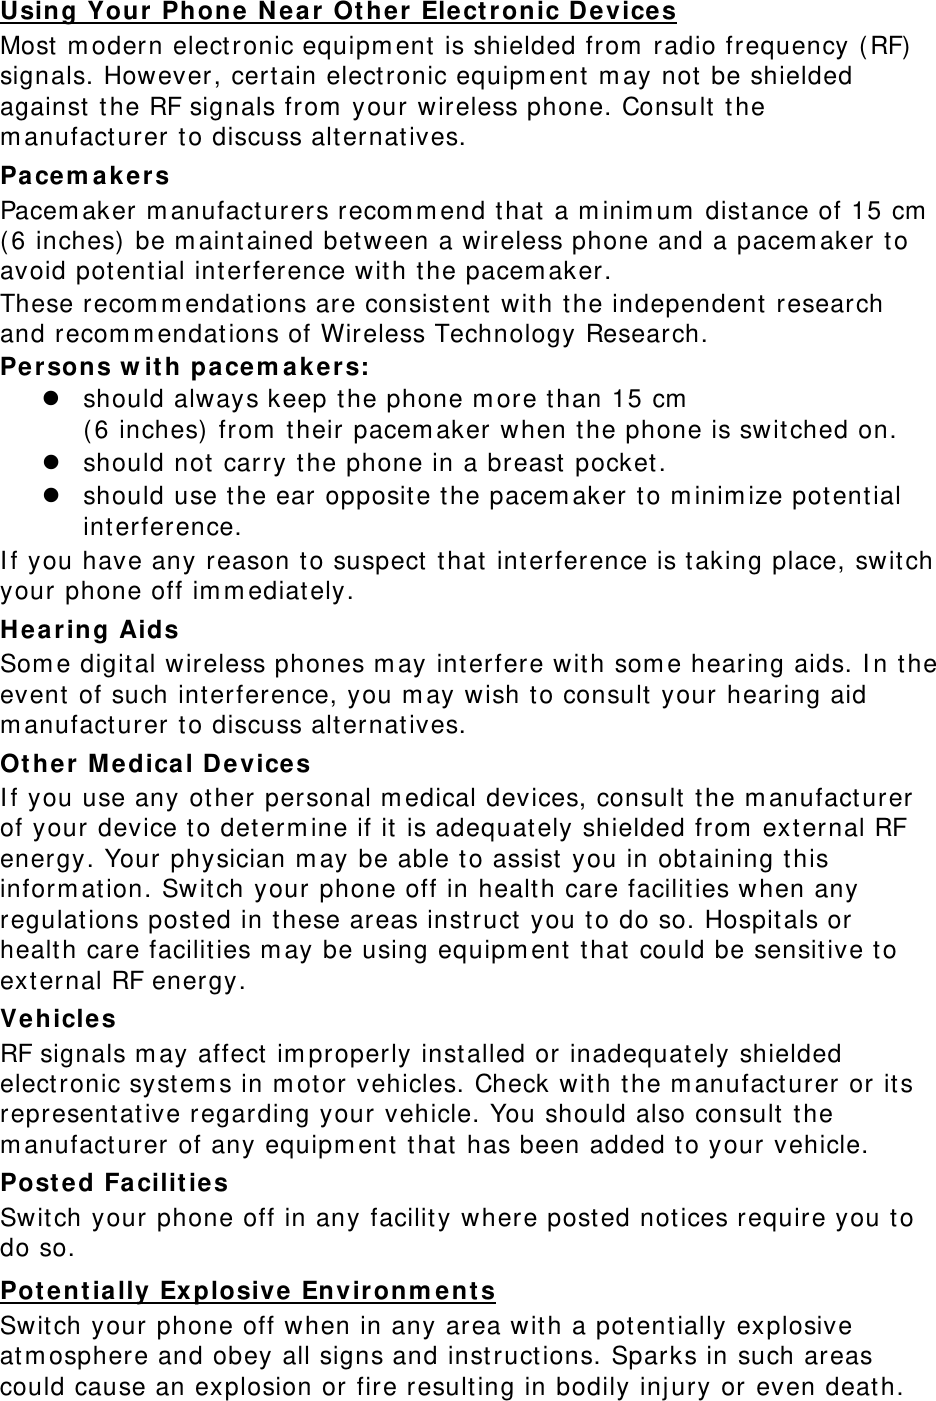 Using Your Phone  N ear  Ot her Elect r onic Device s Most  m odern elect ronic equipm ent is shielded from  radio frequency ( RF)  signals. However, cert ain elect ronic equipm ent  m ay not  be shielded against  t he RF signals from  your wireless phone. Consult t he m anufact urer to discuss alt ernatives. Pa ce m ak er s Pacem aker m anufacturers recom m end that  a m inim um  dist ance of 15 cm  ( 6 inches)  be m aint ained bet ween a wireless phone and a pacem aker t o avoid pot ent ial int erference with t he pacem aker. These recom m endations are consist ent with t he independent  research and recom m endat ions of Wireless Technology Research. Per sons w it h  pa ce m a k er s:  should always keep t he phone m ore than 15 cm    ( 6 inches)  from  t heir pacem aker when t he phone is switched on.  should not  carry t he phone in a breast pocket.  should use t he ear opposit e the pacem aker t o m inim ize potent ial interference. I f you have any reason to suspect  that interference is taking place, switch your phone off im m ediat ely. Hea ring Aids Som e digit al wireless phones m ay inter fere wit h som e hearing aids. I n t he event  of such int erference, you m ay wish t o consult  your hearing aid m anufact urer to discuss alt ernatives. Ot he r M edica l D e vices I f you use any ot her personal m edical devices, consult t he m anufact urer of your device to determ ine if it  is adequat ely shielded from  ext ernal RF energy. Your physician m ay be able t o assist  you in obt aining t his inform ation. Switch your phone off in healt h care facilities w hen any regulat ions post ed in t hese areas inst ruct  you to do so. Hospitals or health care facilit ies m ay be using equipm ent  t hat  could be sensitive to external RF energy. Vehicles RF signals m ay affect  im properly inst alled or inadequat ely shielded elect ronic syst em s in m otor vehicles. Check with t he m anufact urer or it s representative regarding your vehicle. You should also consult  t he m anufact urer of any equipm ent  t hat  has been added t o your vehicle. Post ed Fa cilit ies Swit ch your phone off in any facilit y wher e posted notices require you t o do so. Pot e nt ia lly Ex plosive Envir on m ent s Switch your phone off when in any area wit h a potent ially explosive atm osphere and obey all signs and inst ruct ions. Sparks in such areas could cause an explosion or fire result ing in bodily inj ury or even deat h. 